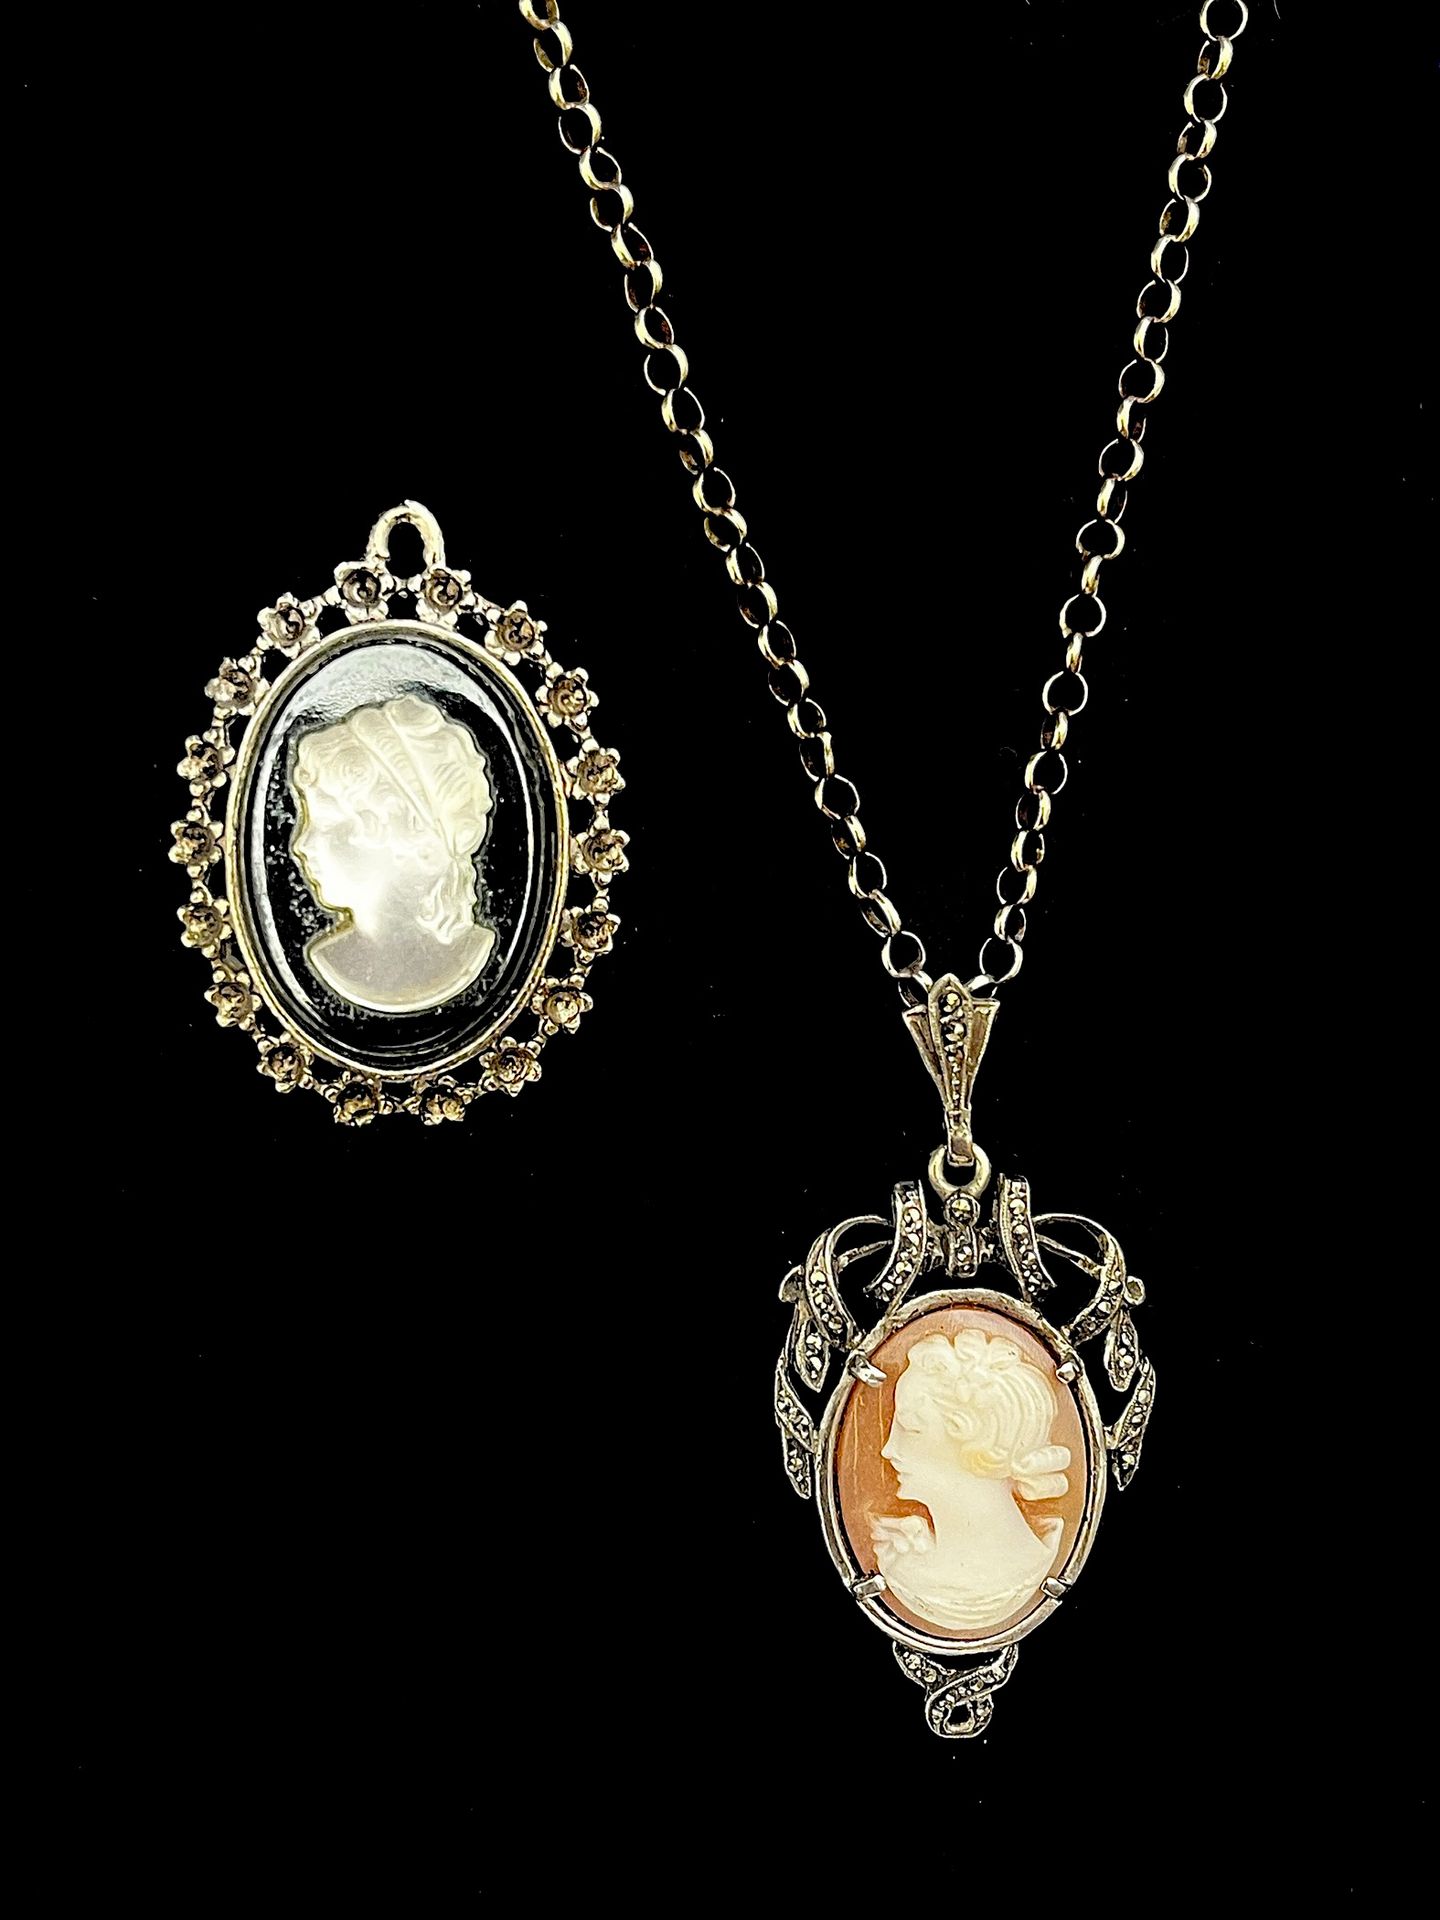 Null Set in sterling silver at 800°/00 comprising a shell cameo pendant highligh&hellip;